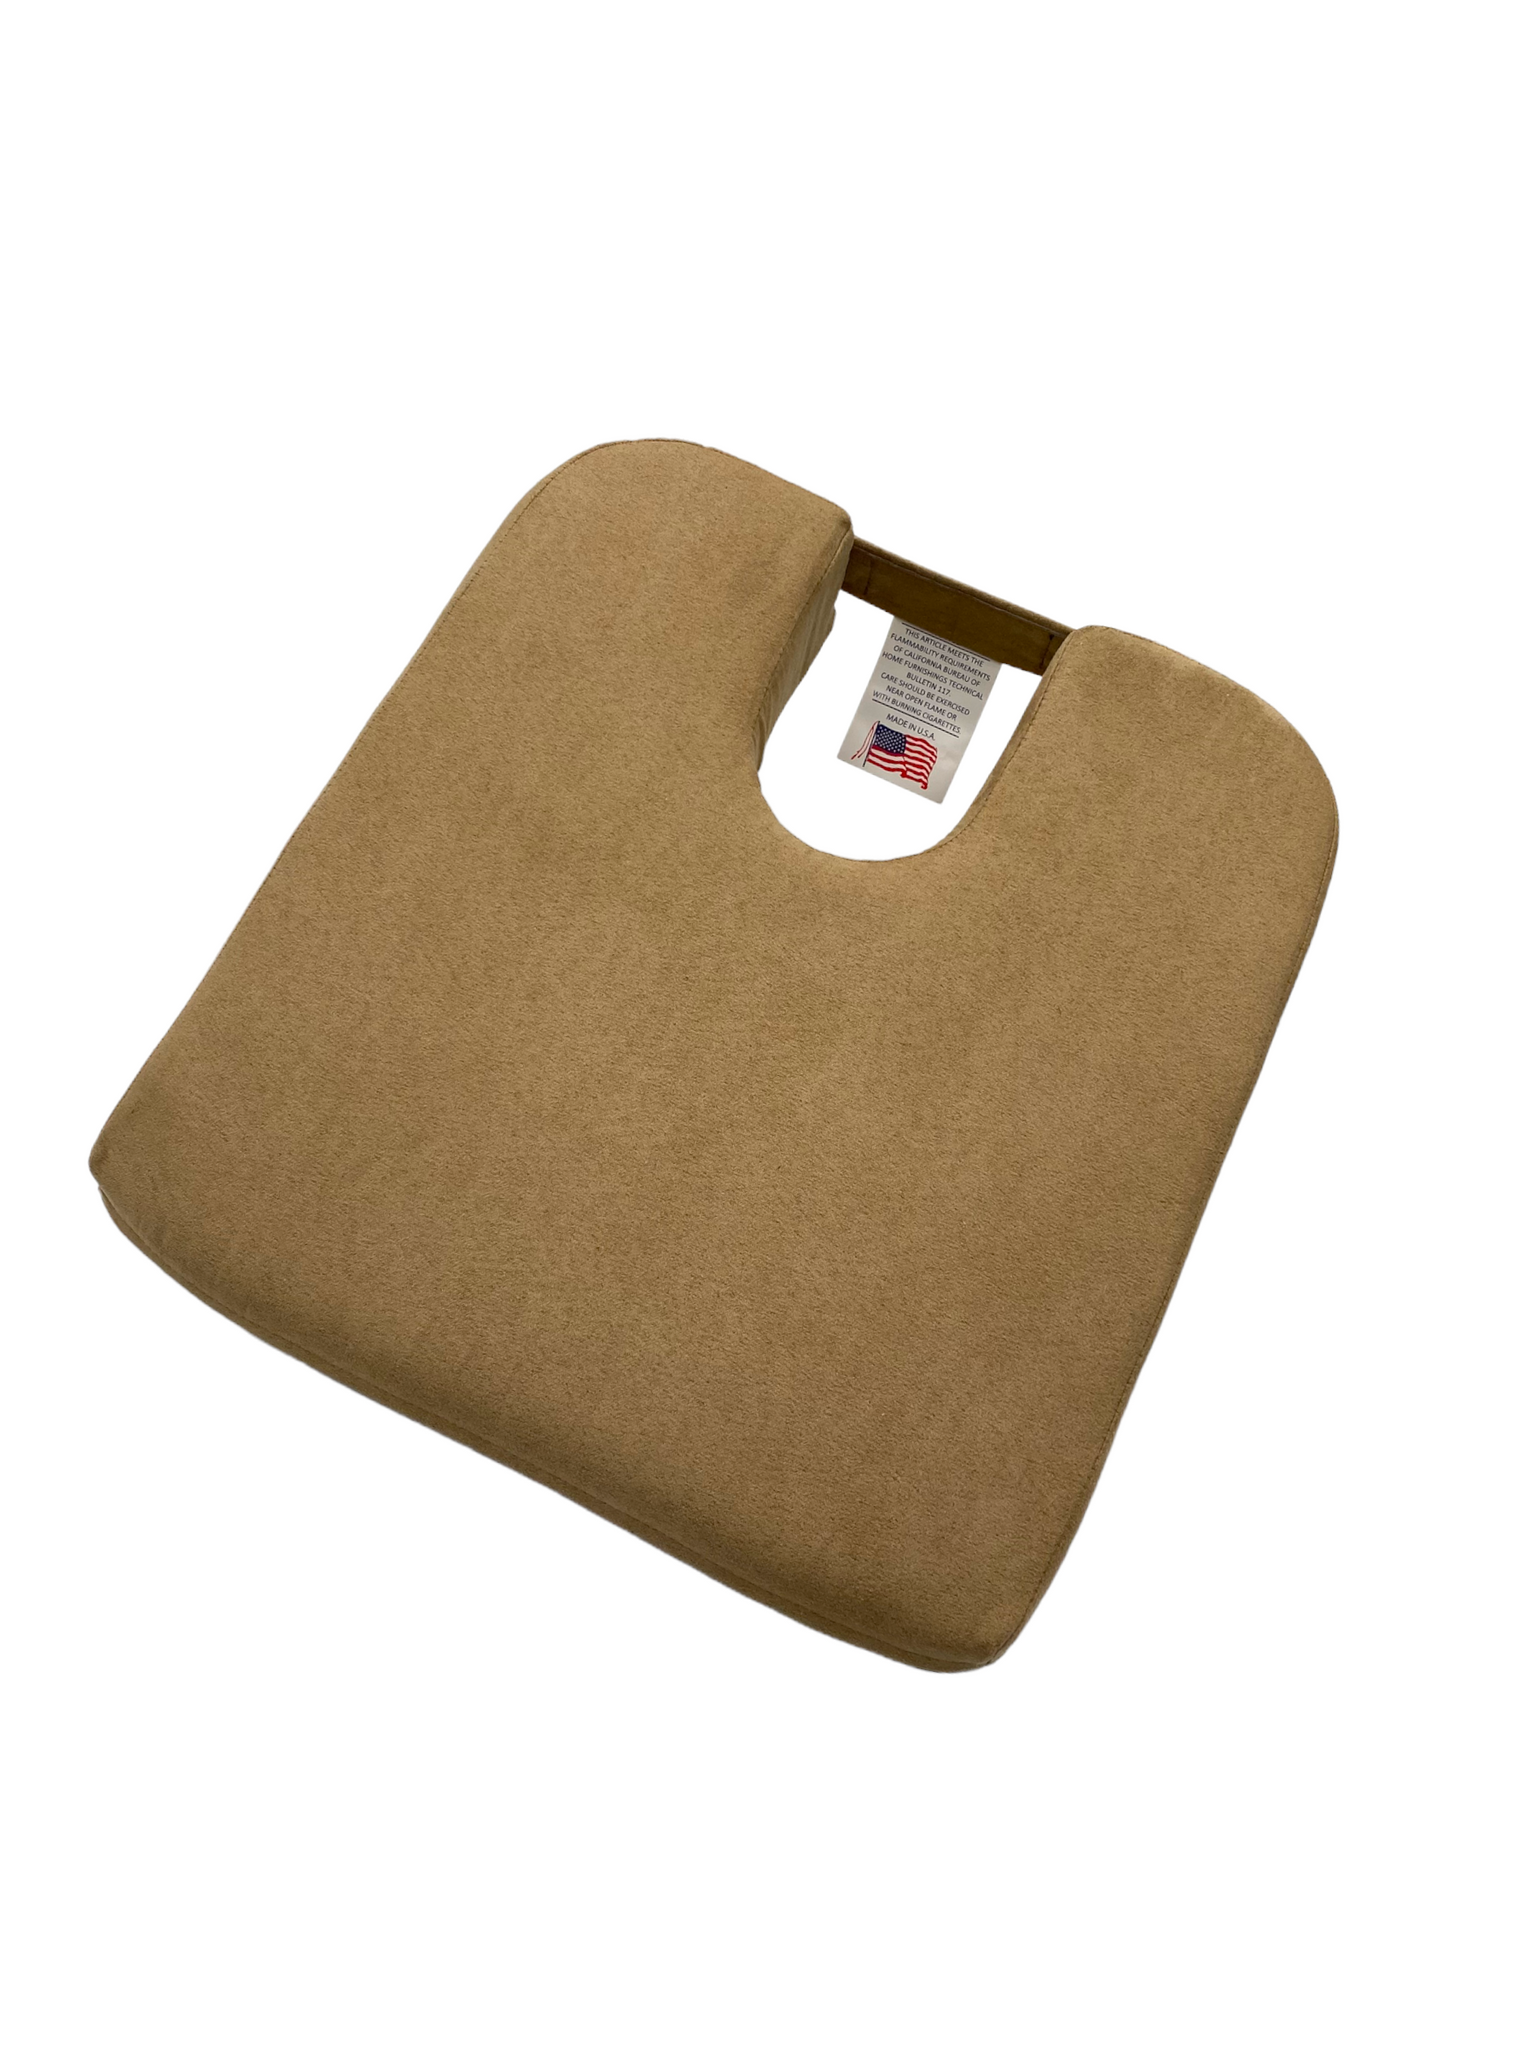 Extra Firm Extended Width Tush Cush Seat Cushion Relieves and Prevents Pain